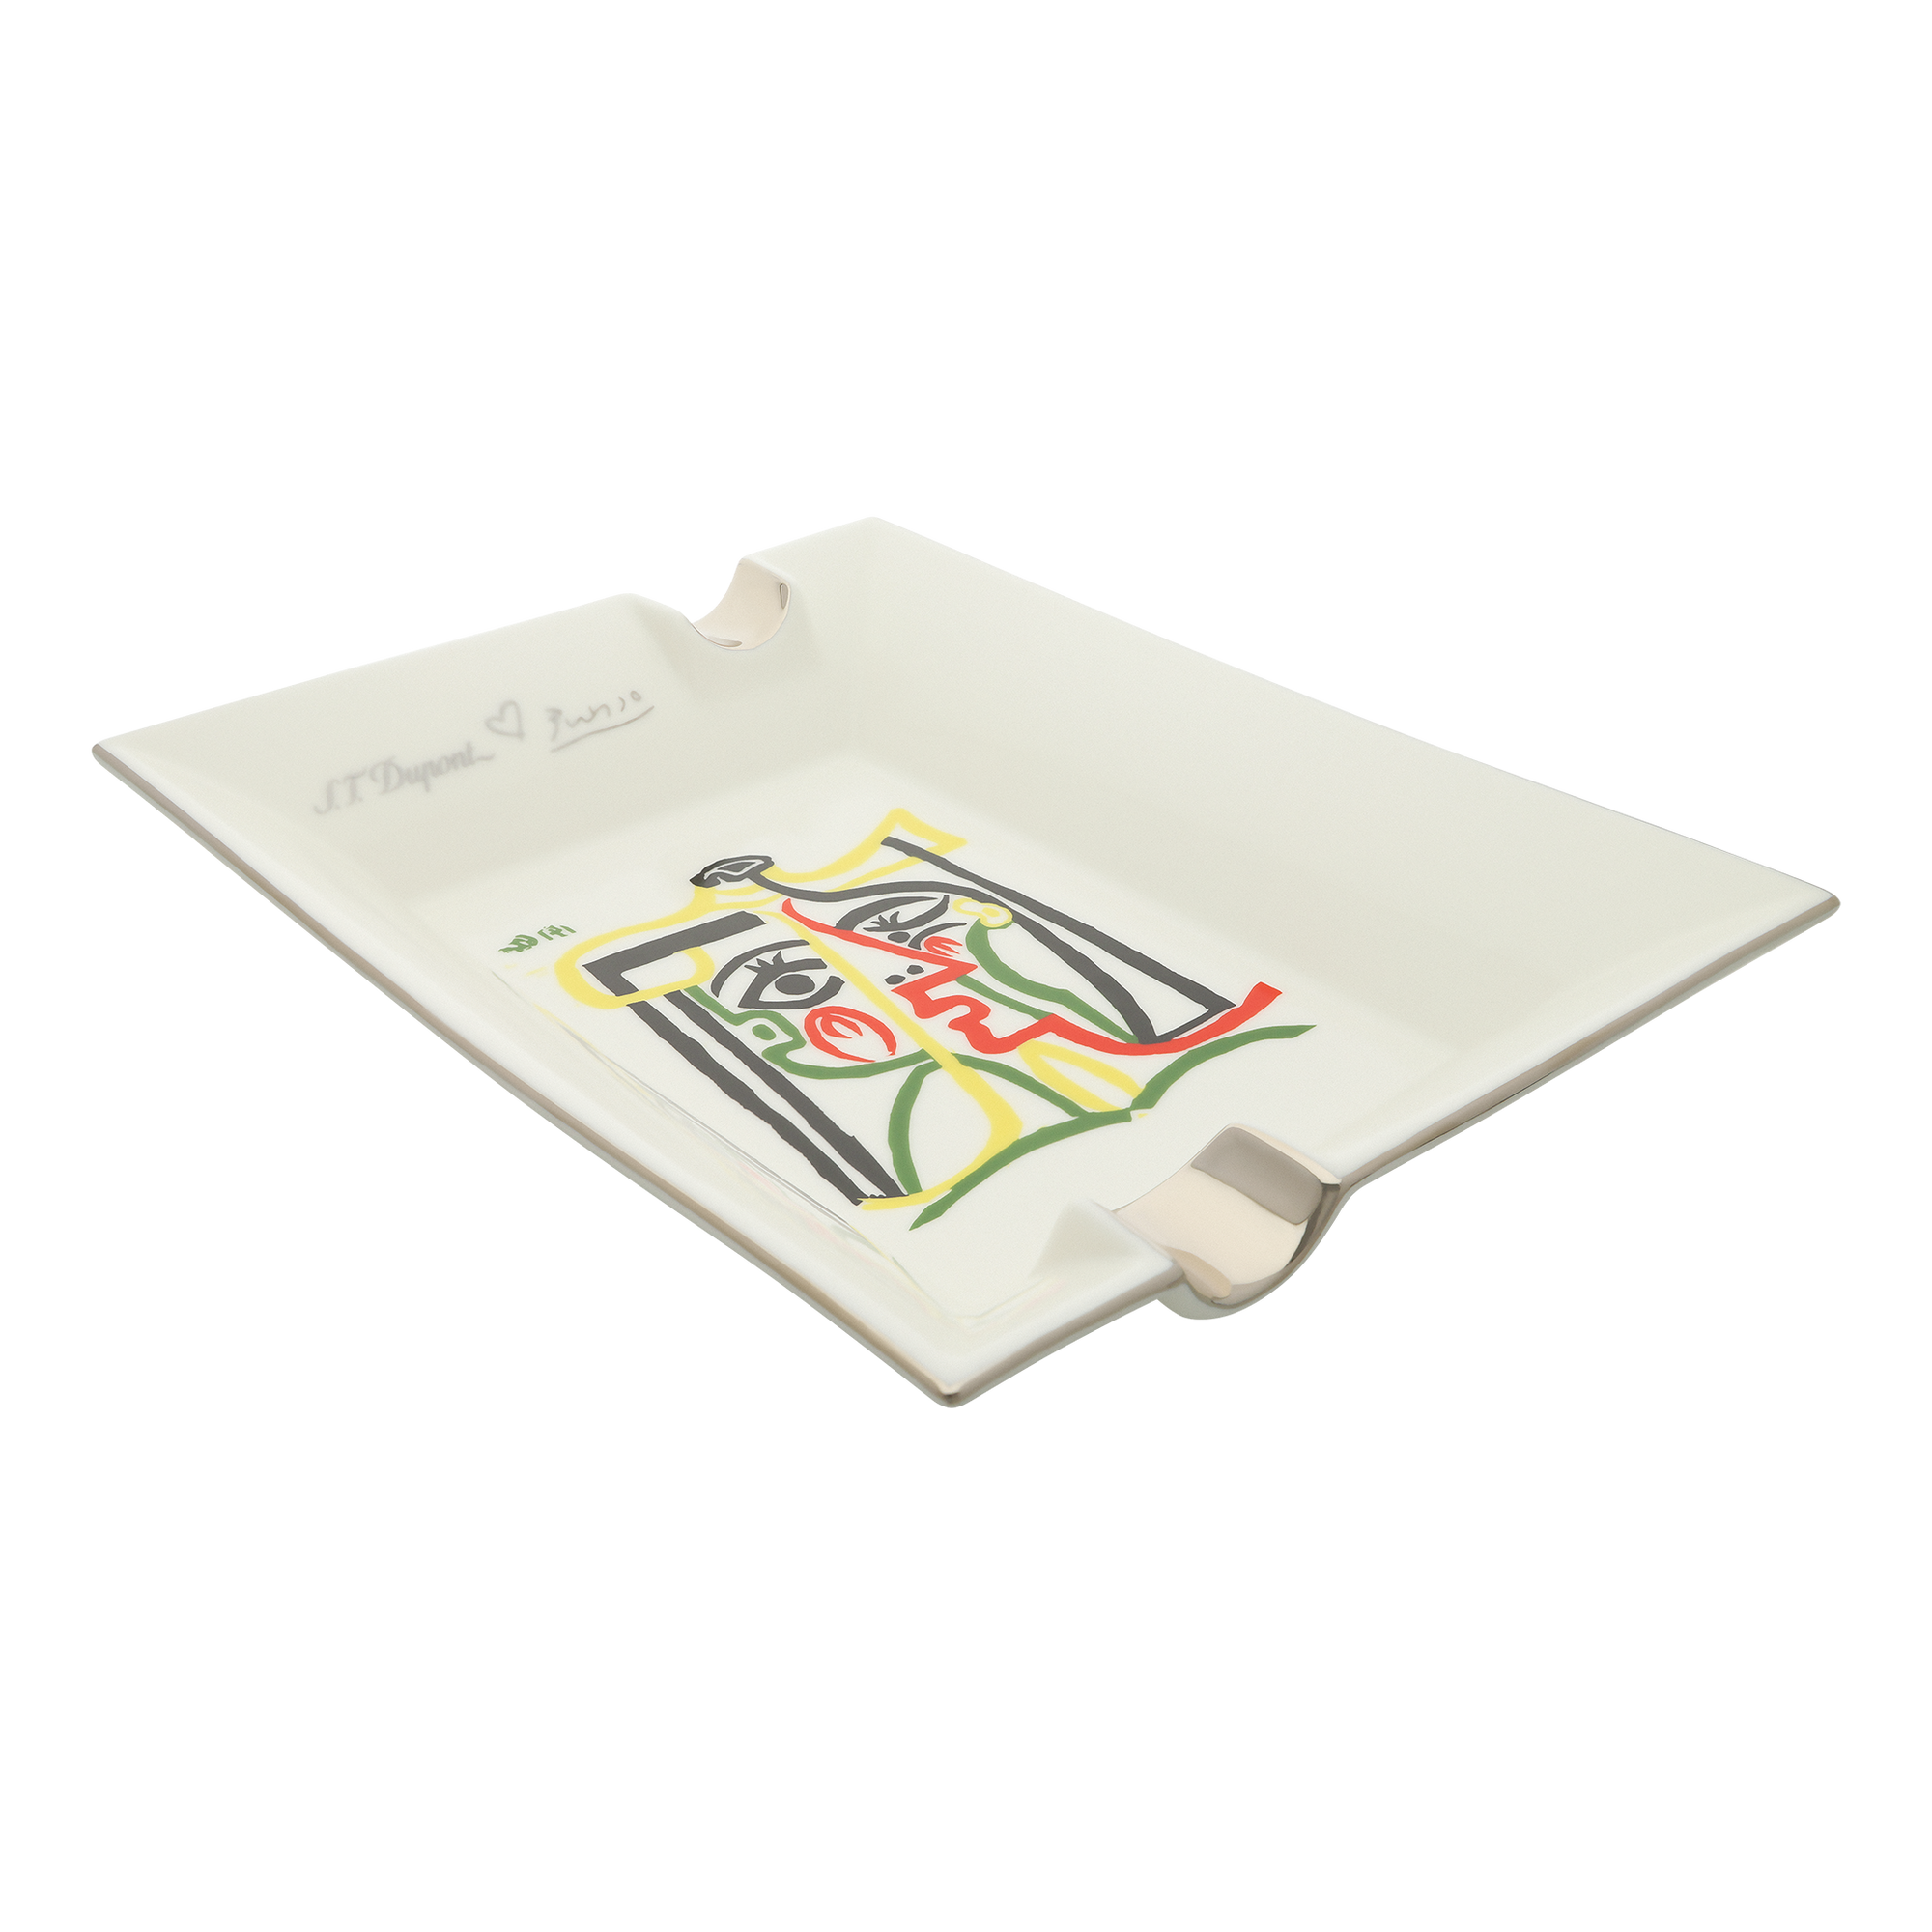 DUPONT ACCESSORIES S.T.DUPONT ASHTRAY PICASSO WHITE NO.006481